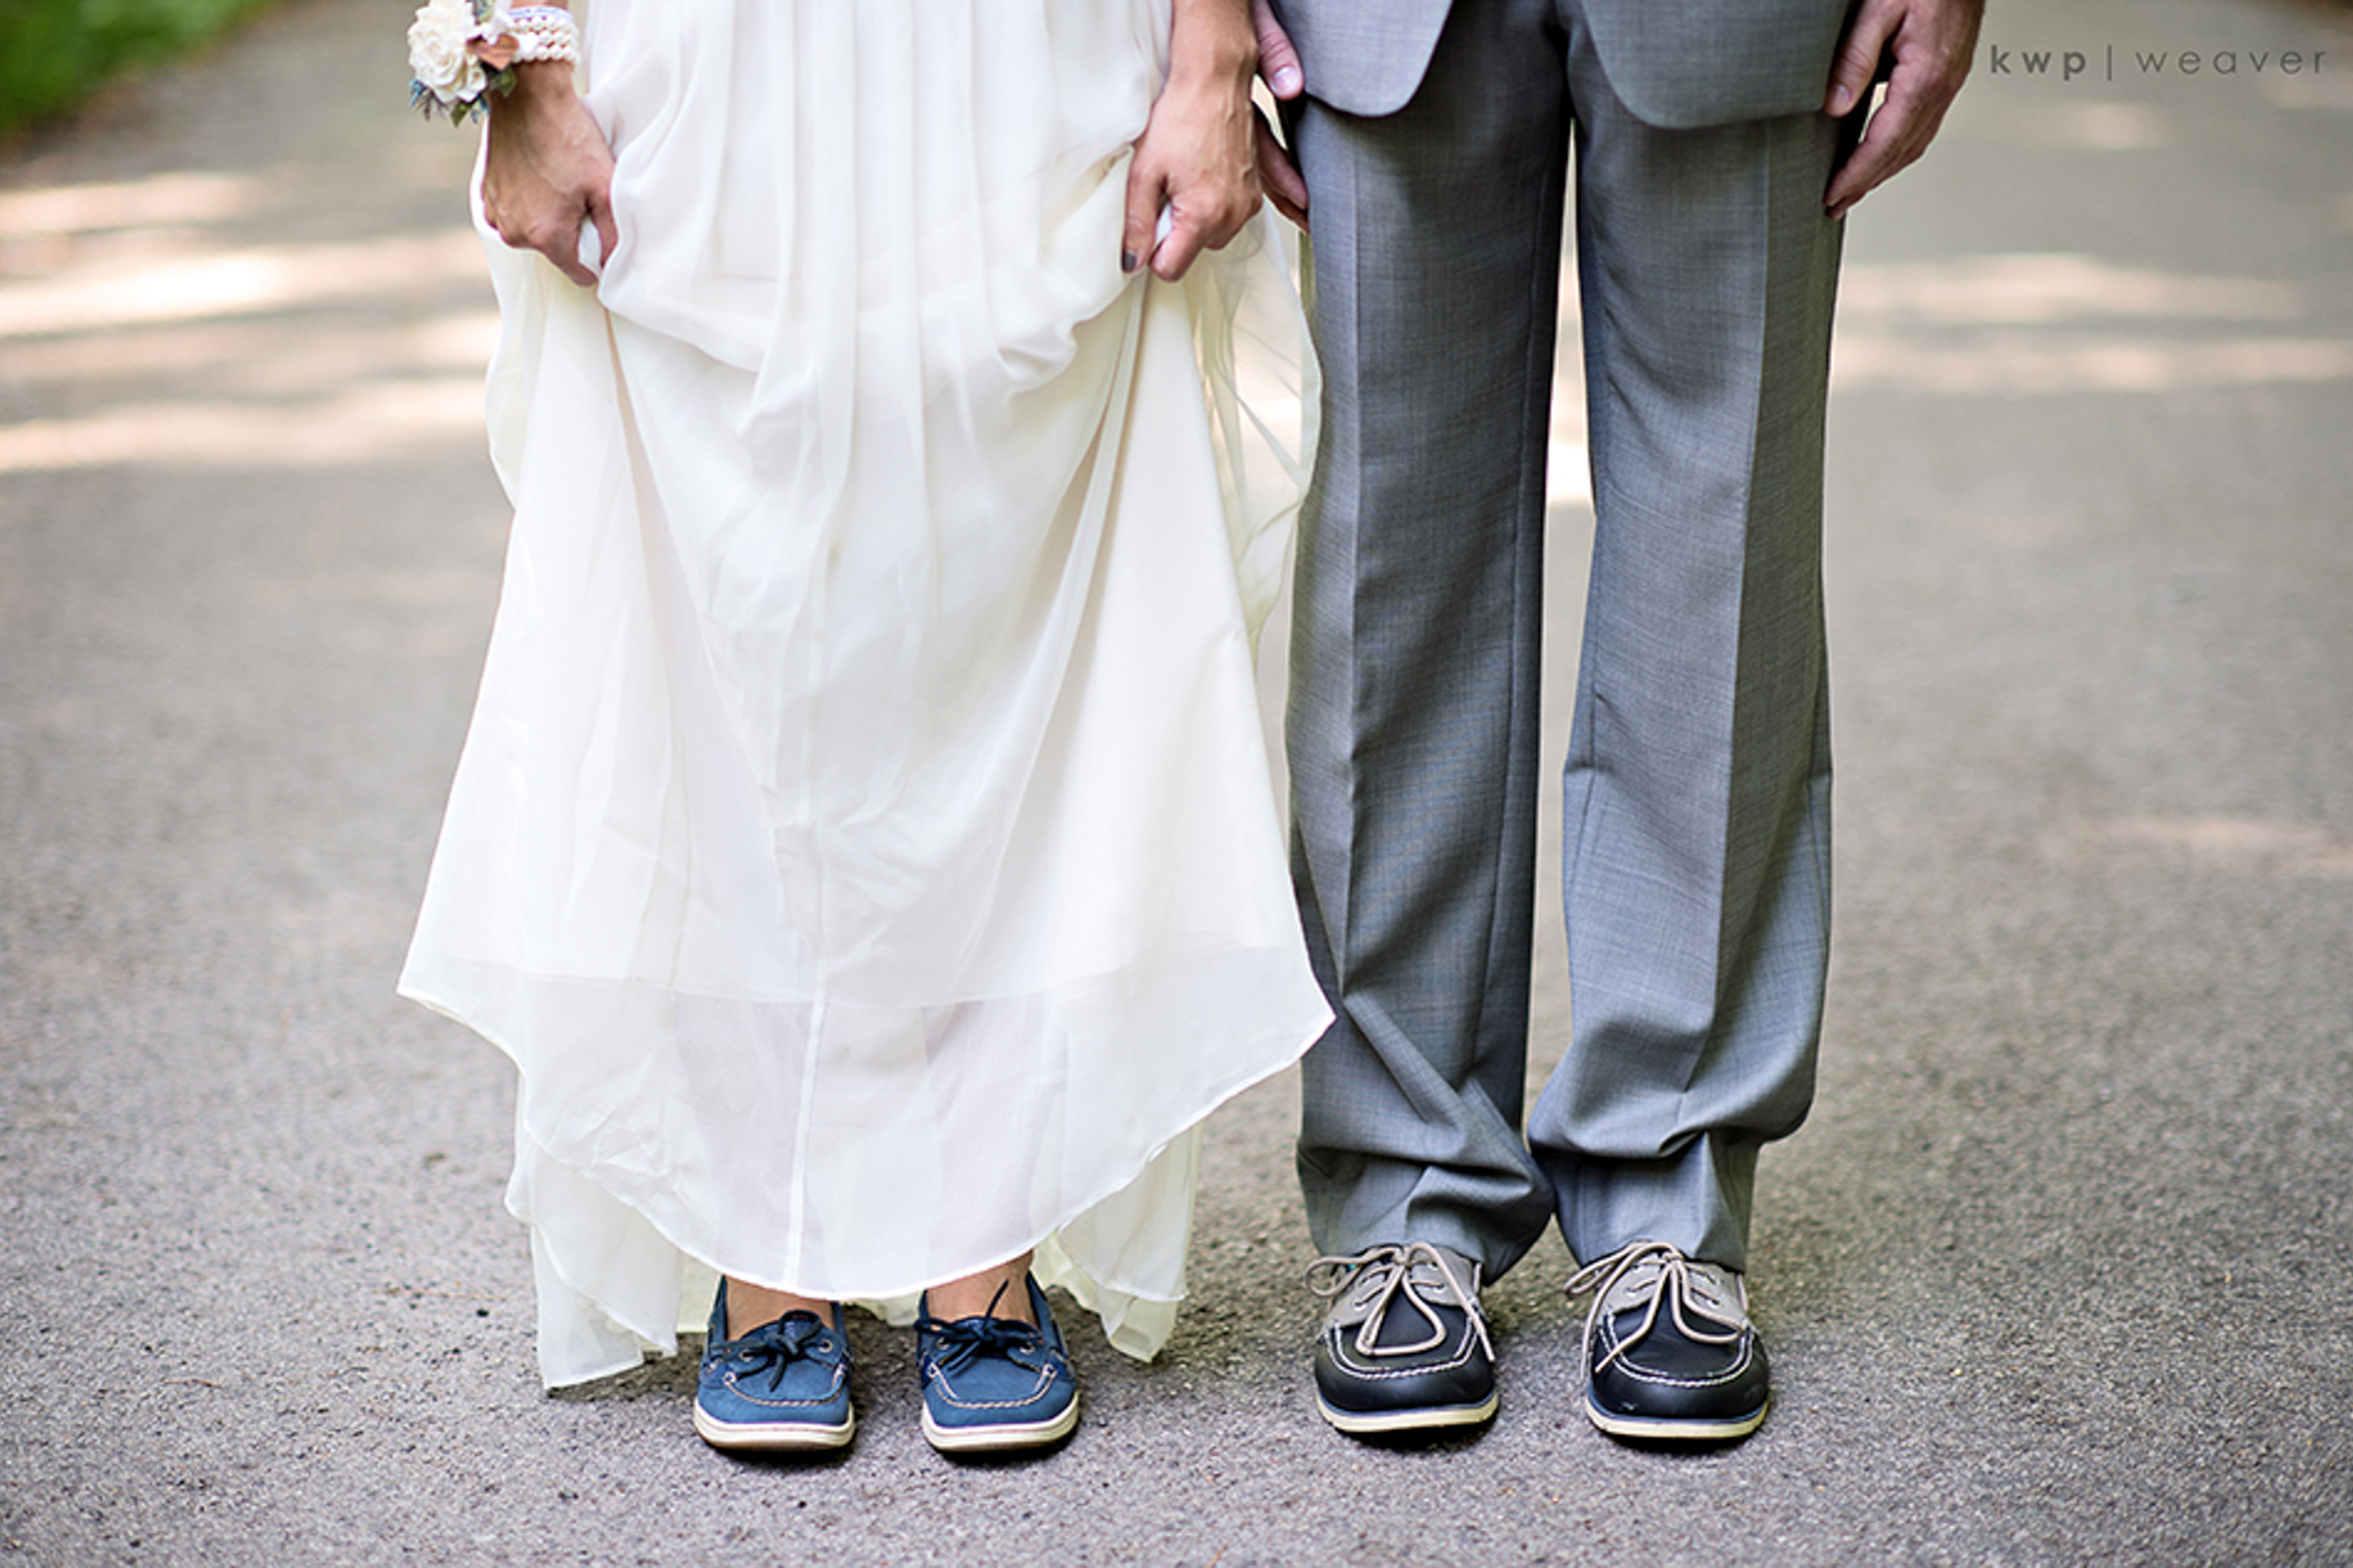 sperry wedding shoes